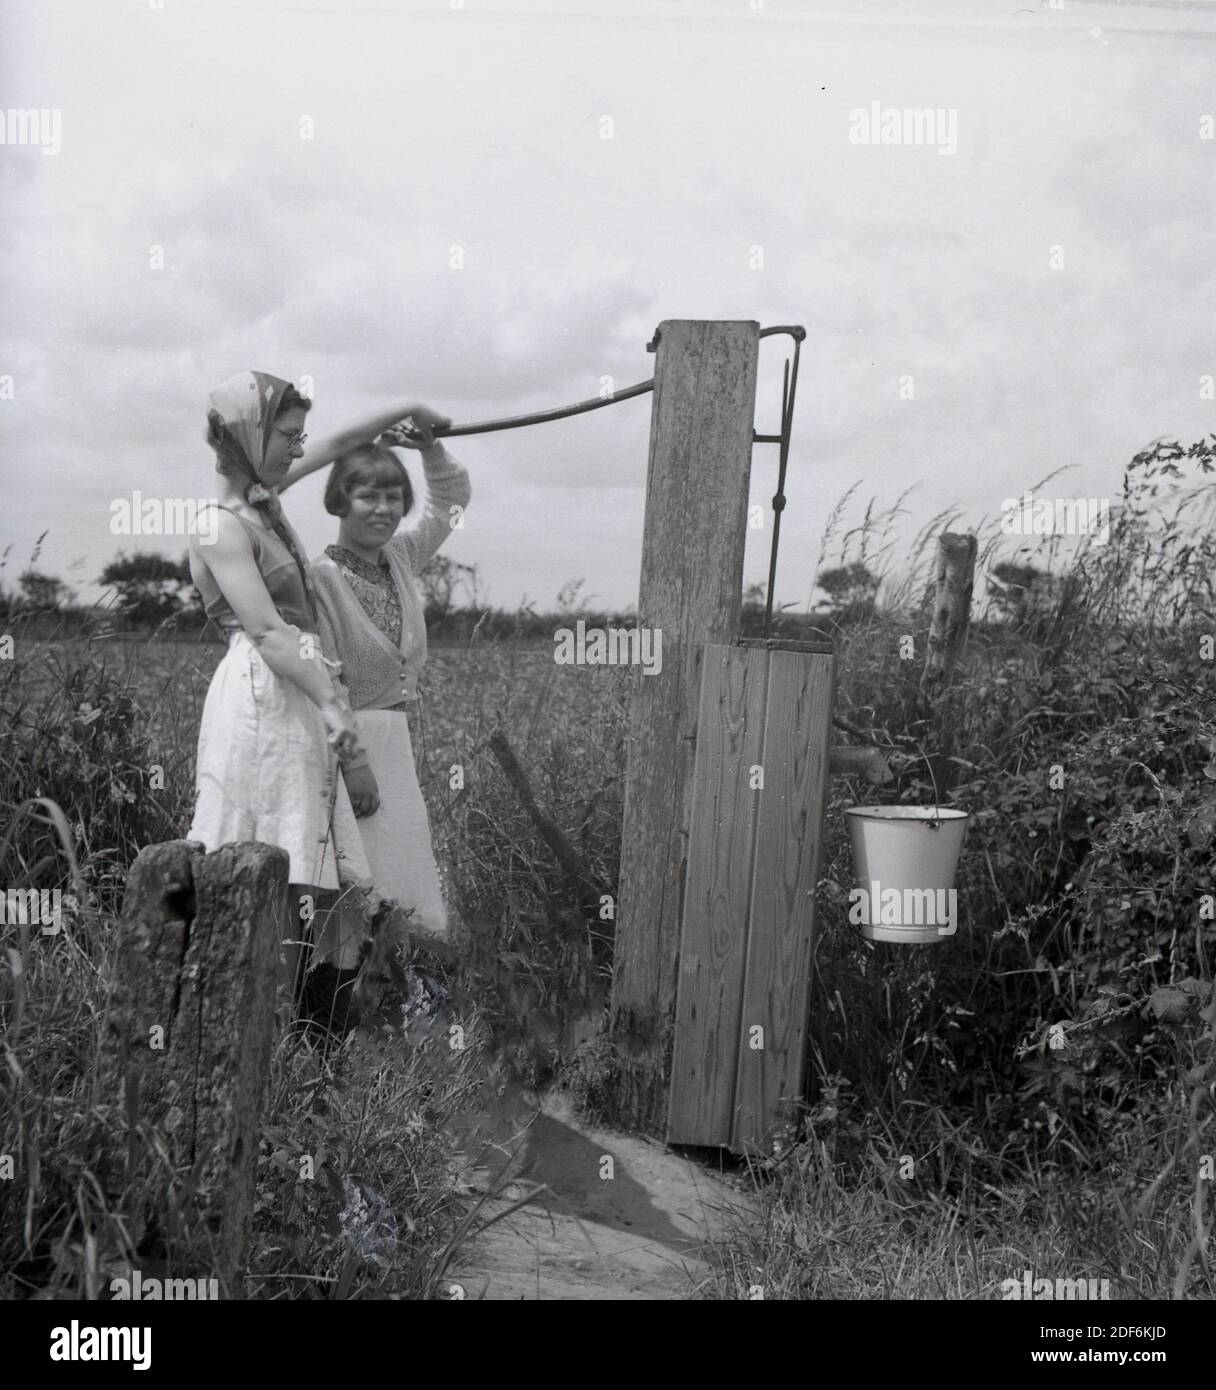 1940s, historical, on a narrow path beside a field, a mother and daughter pushing the wooden handle of a water well to pump water into a metal bucket, England, UK. Growing up in the countryside or a farm in this era meant that a youngster would be expected to help and support her parents on all kind of different jobs. Stock Photo